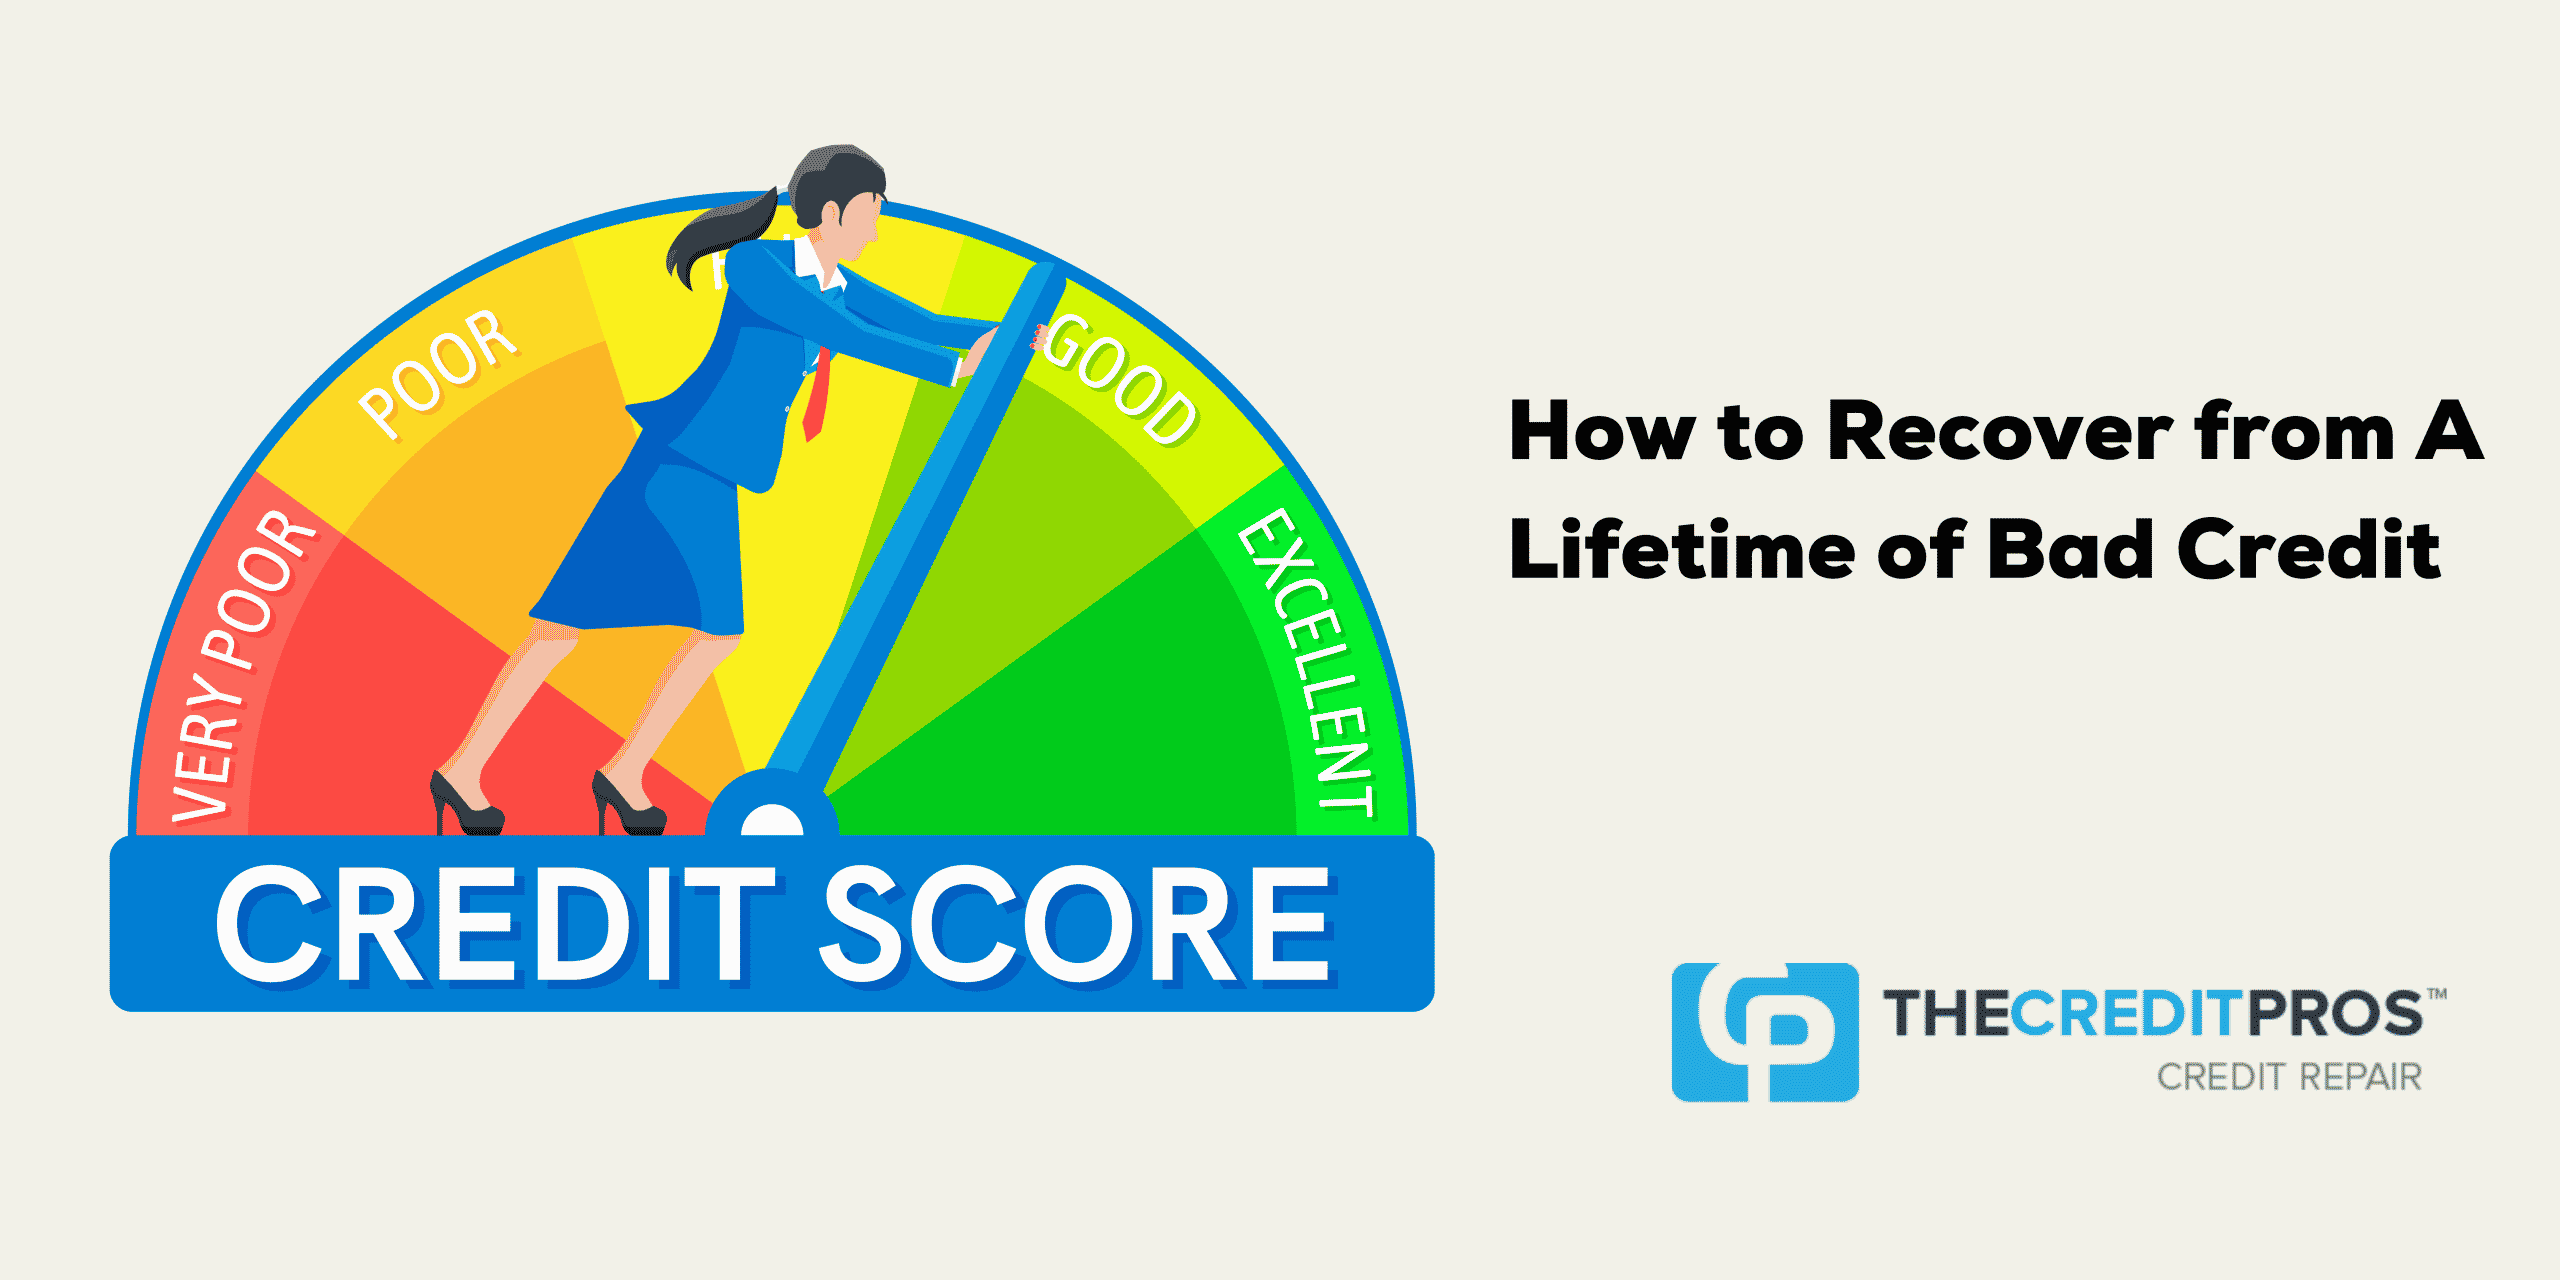 Bad Credit - How To Recover?